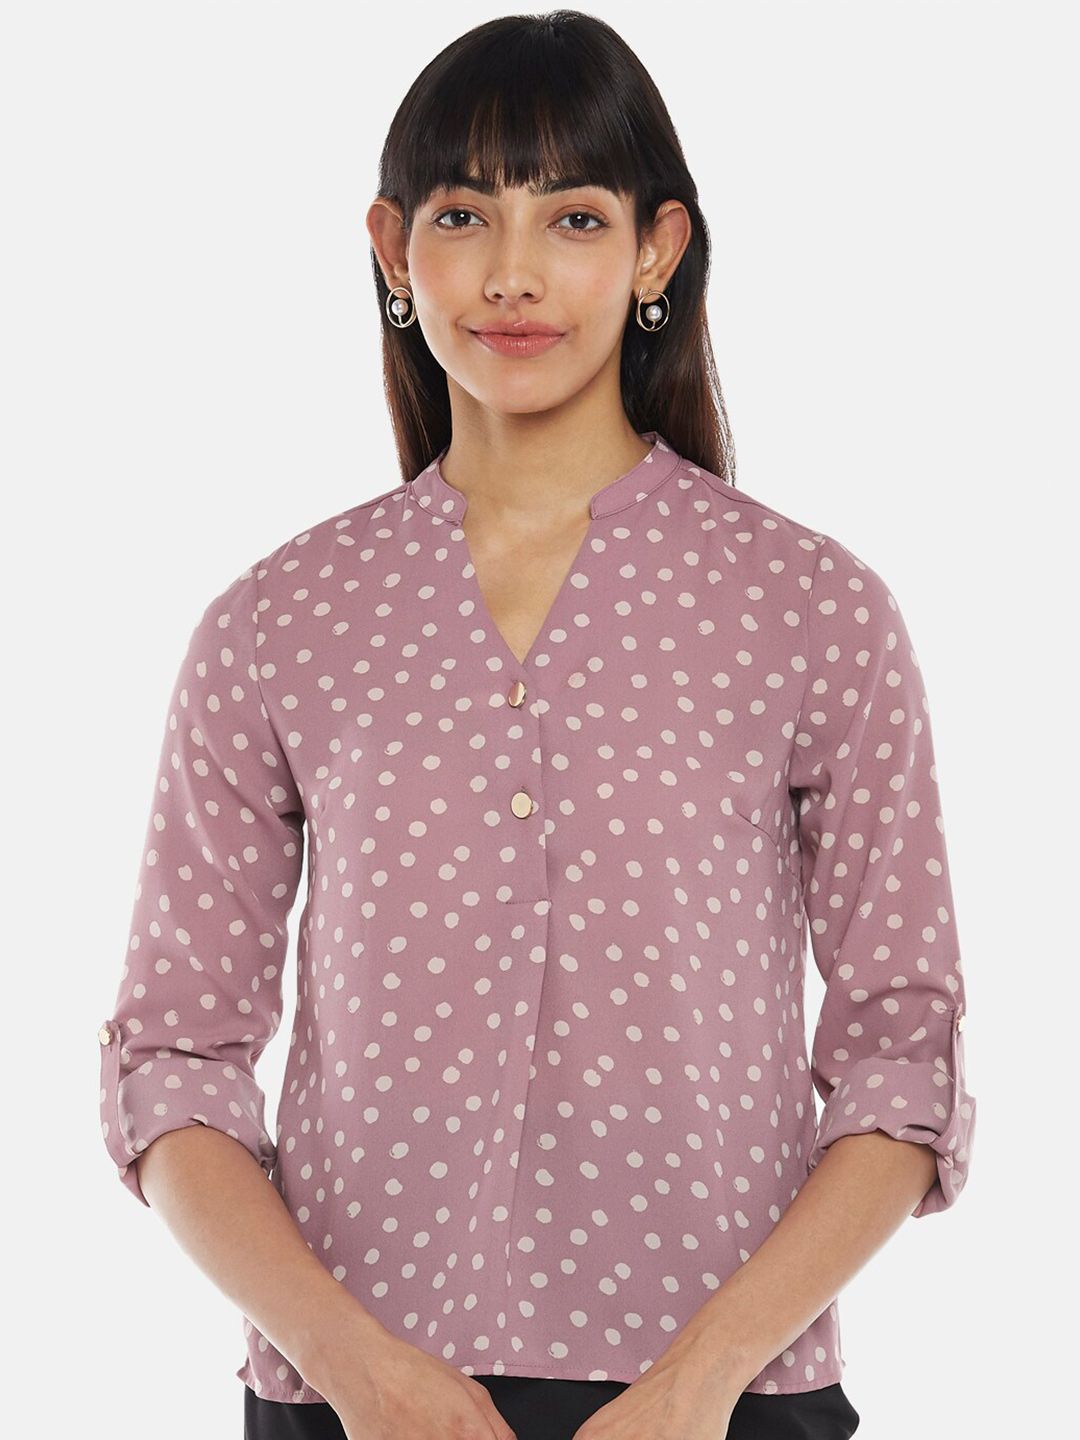 Annabelle by Pantaloons Pink Print Mandarin Collar Roll-Up Sleeves Top Price in India